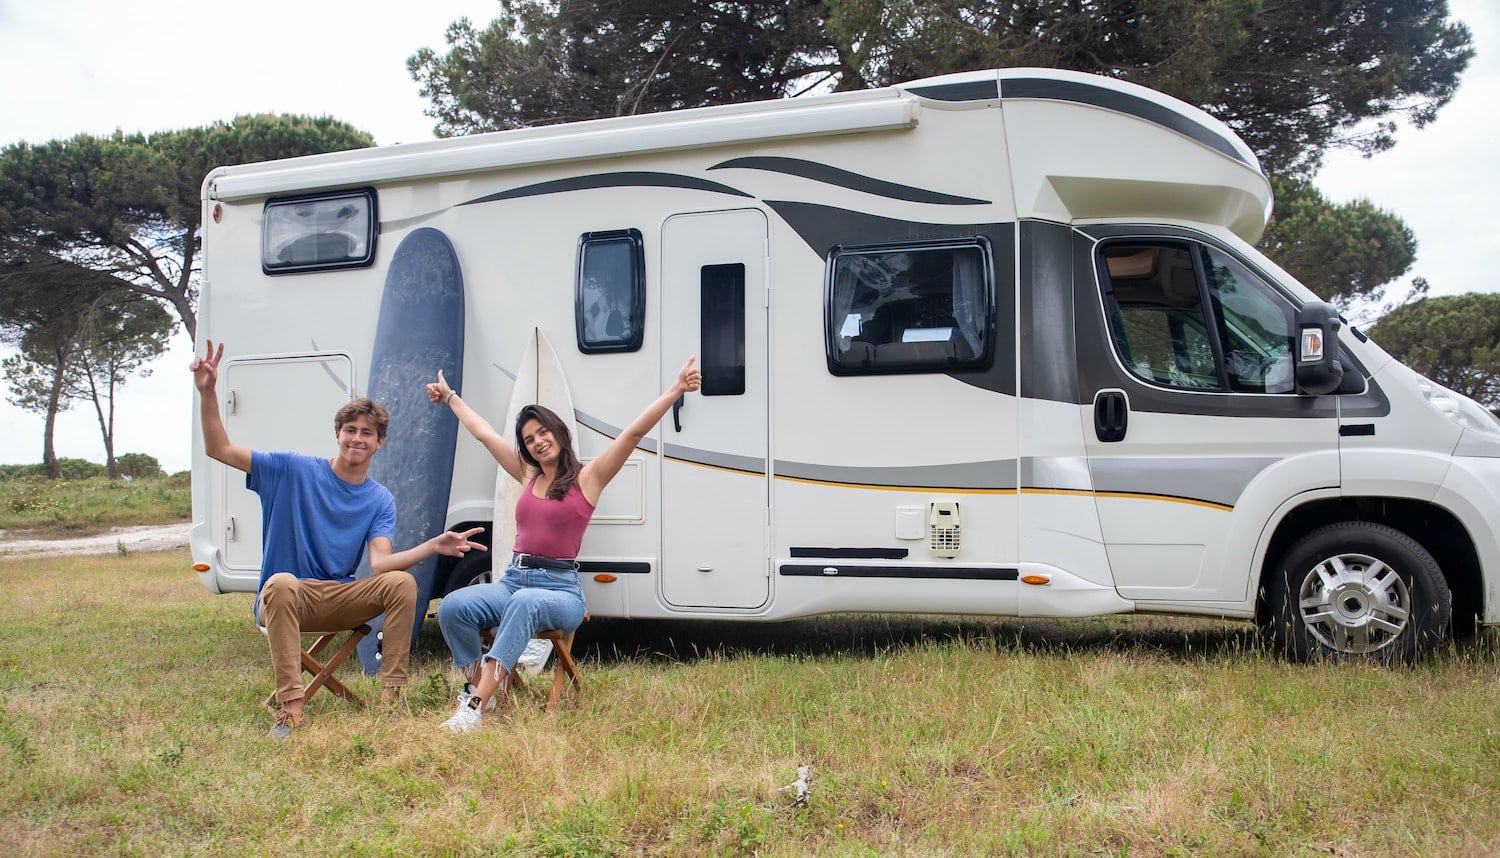 Be Ready for the Summer RV Season and Beyond